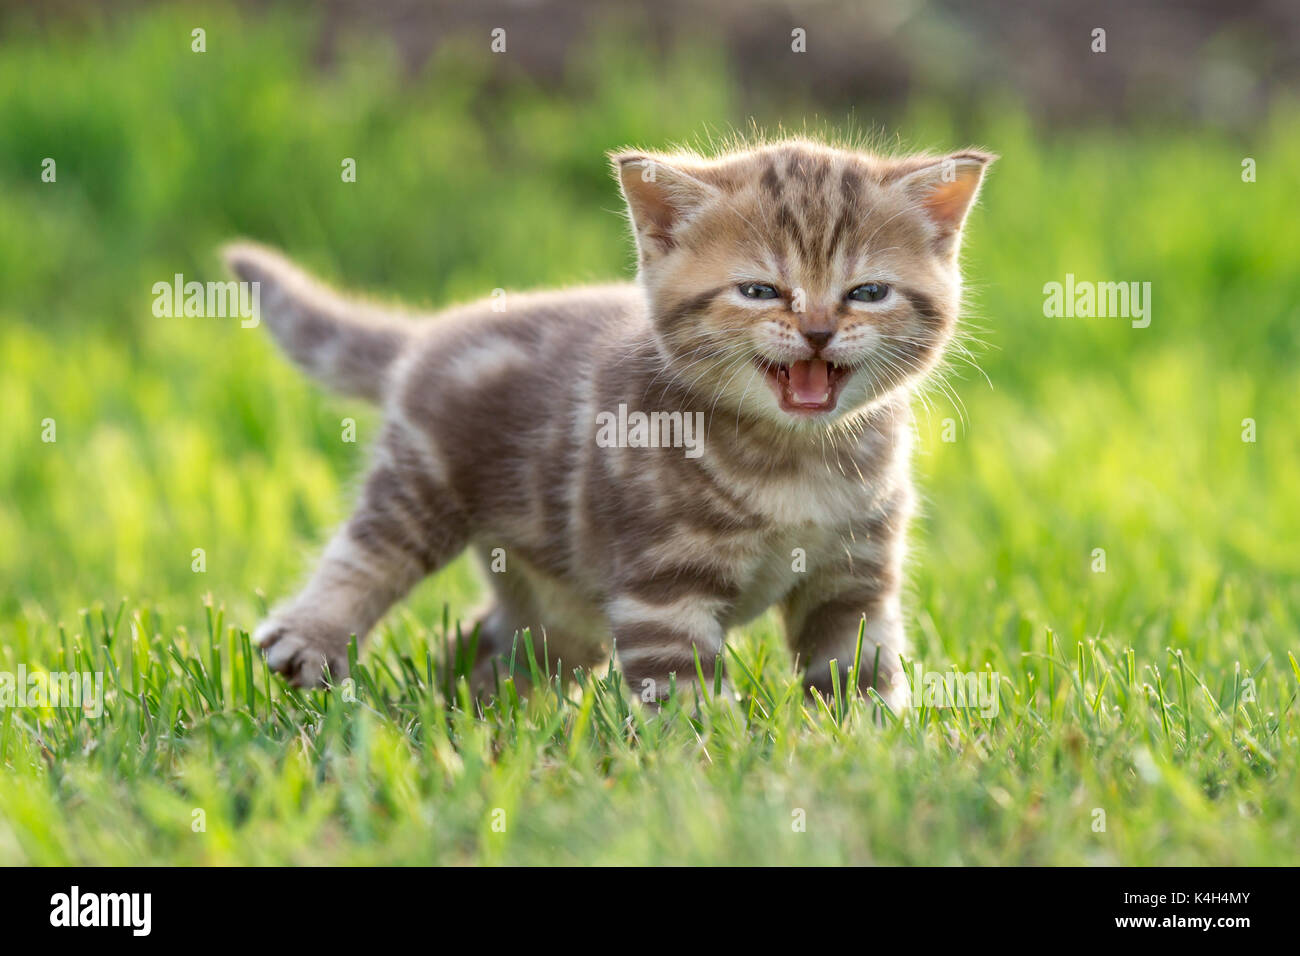 Young cute cat meowing outdoor Stock Photo